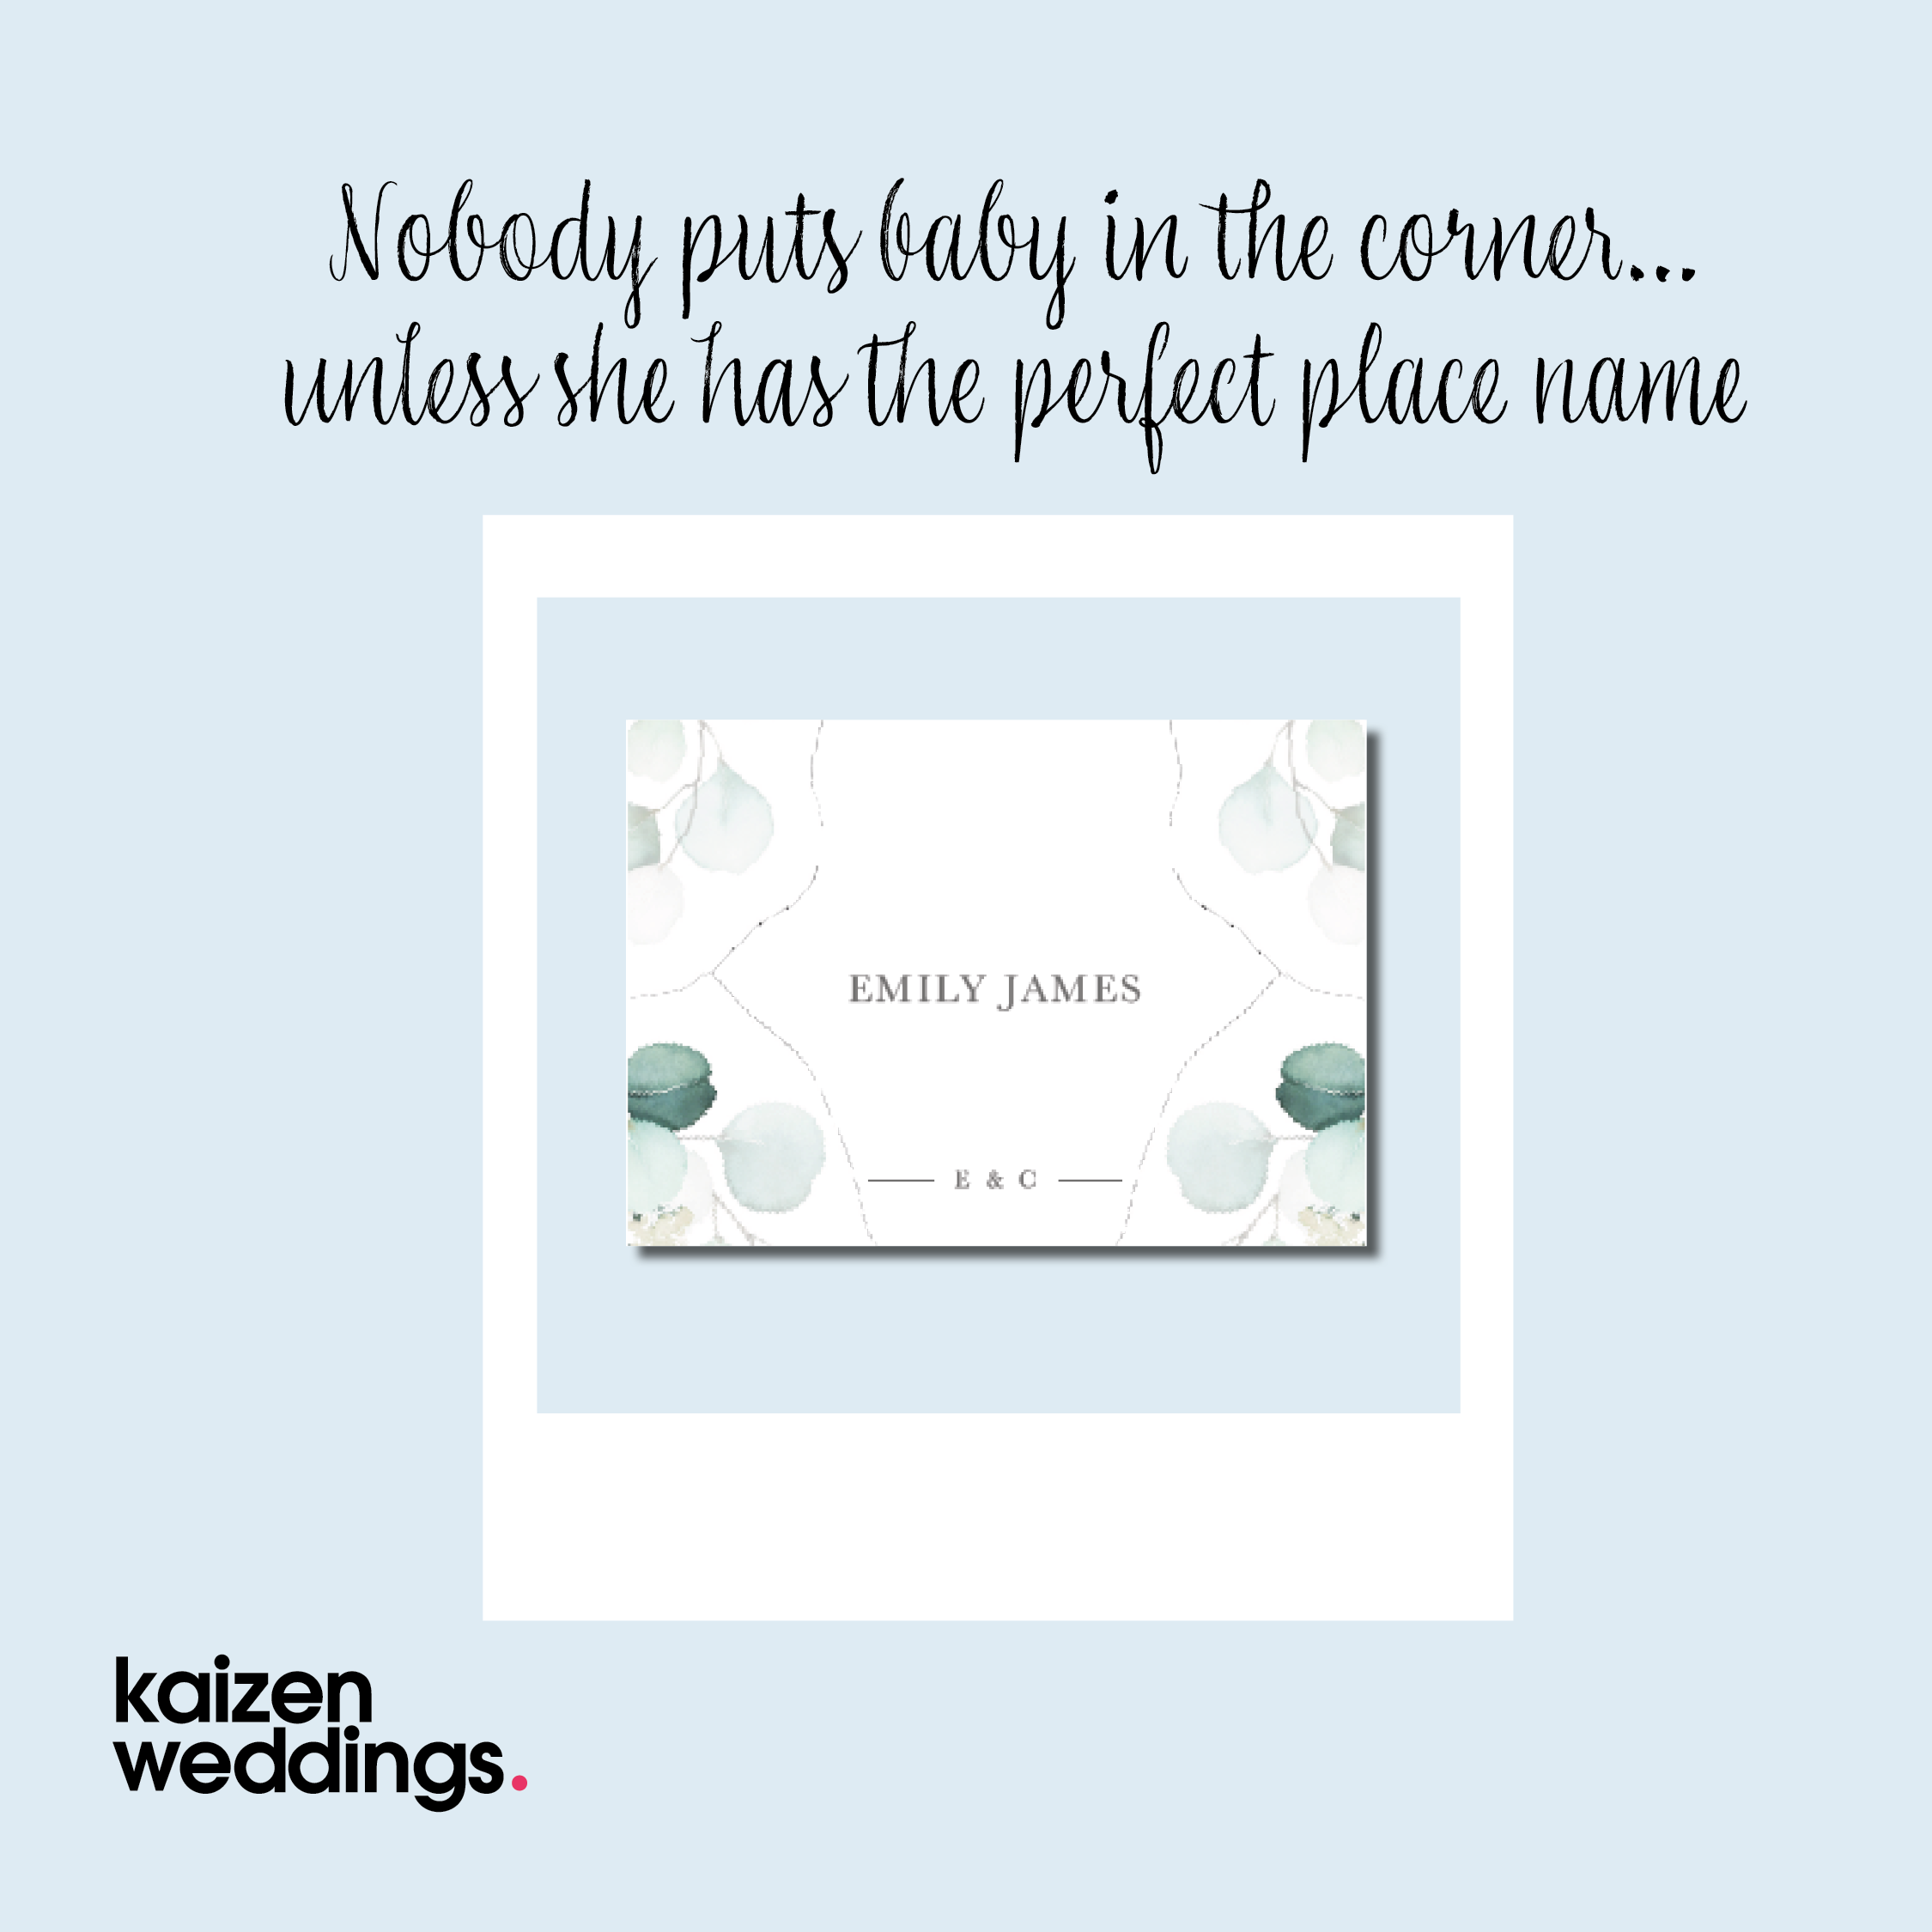 Nobody puts baby in the corner… unless she has the perfect place name